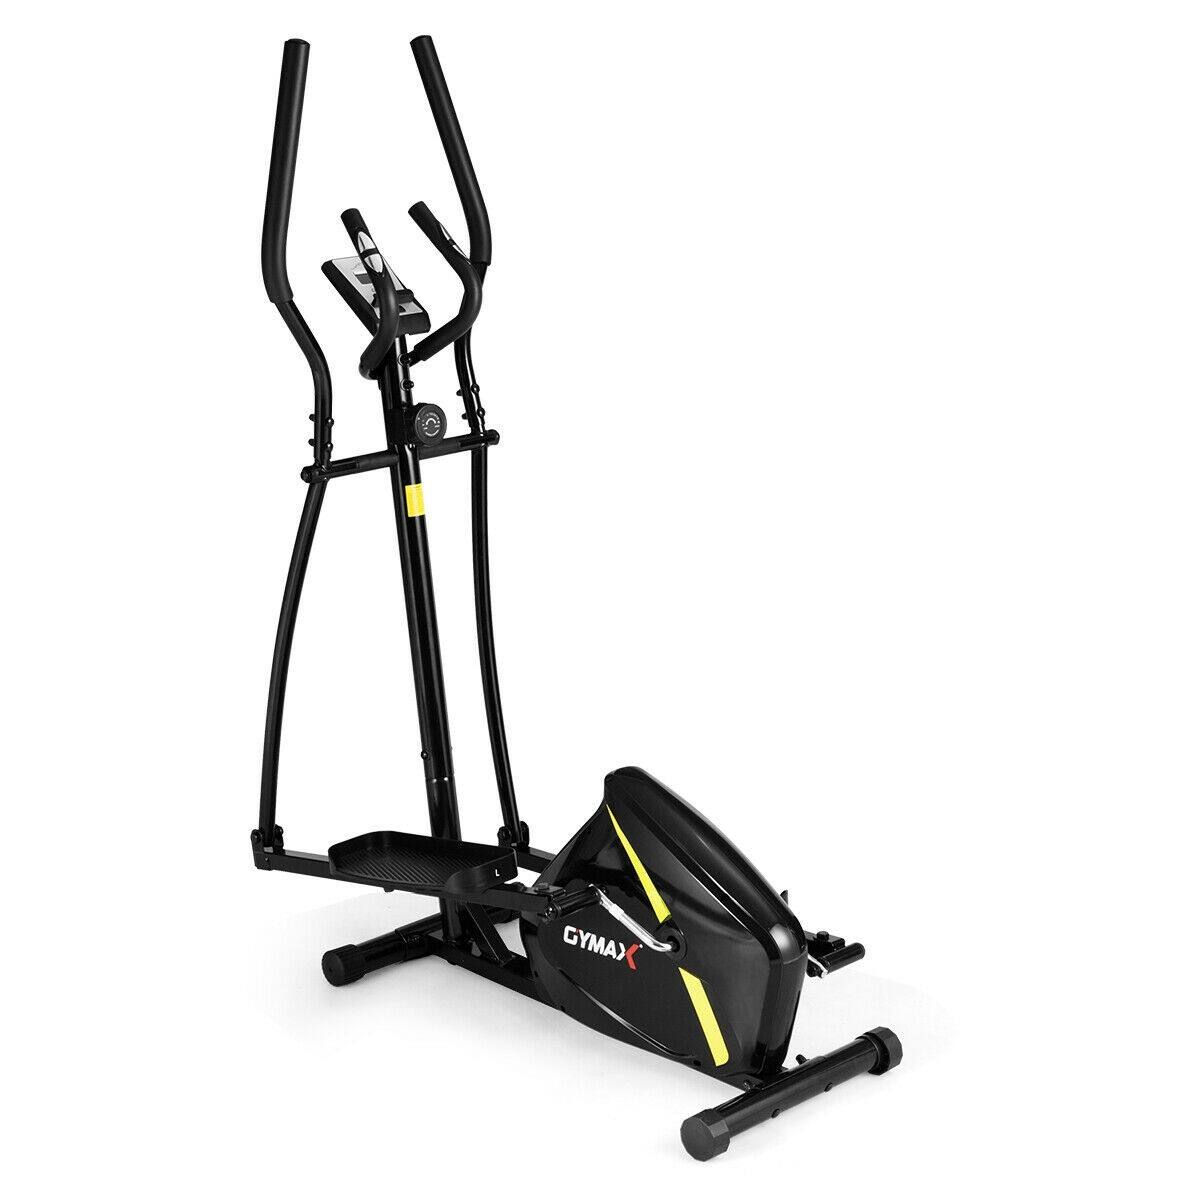 Costway Magnetic Elliptical Machine Trainer for Home Gym Exercise for $139.95 + FS